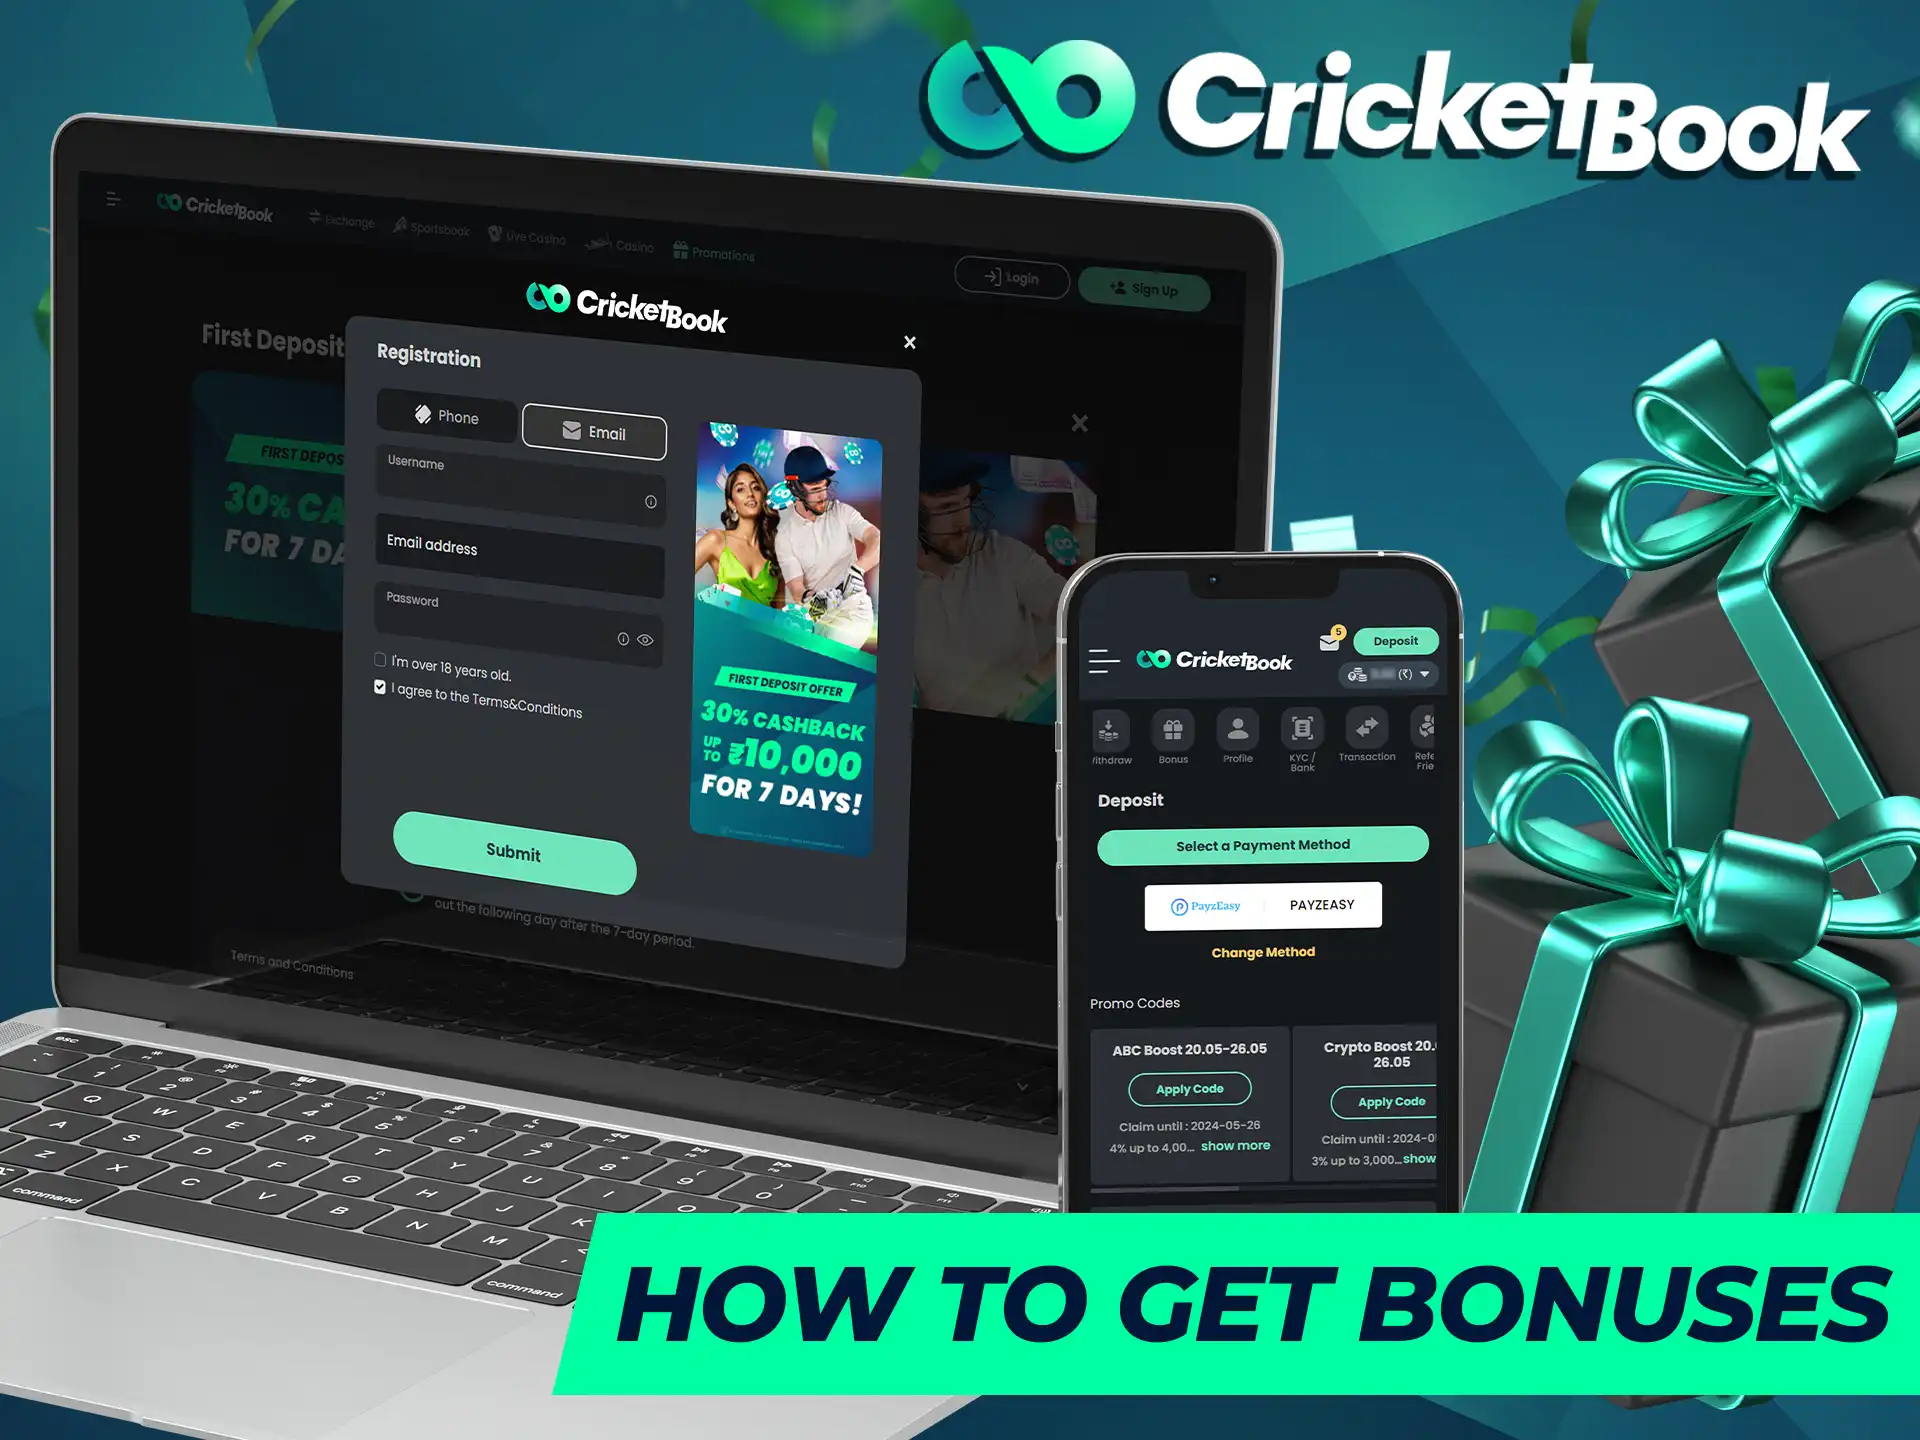 You can get CricketBook bonuses in any convenient way.